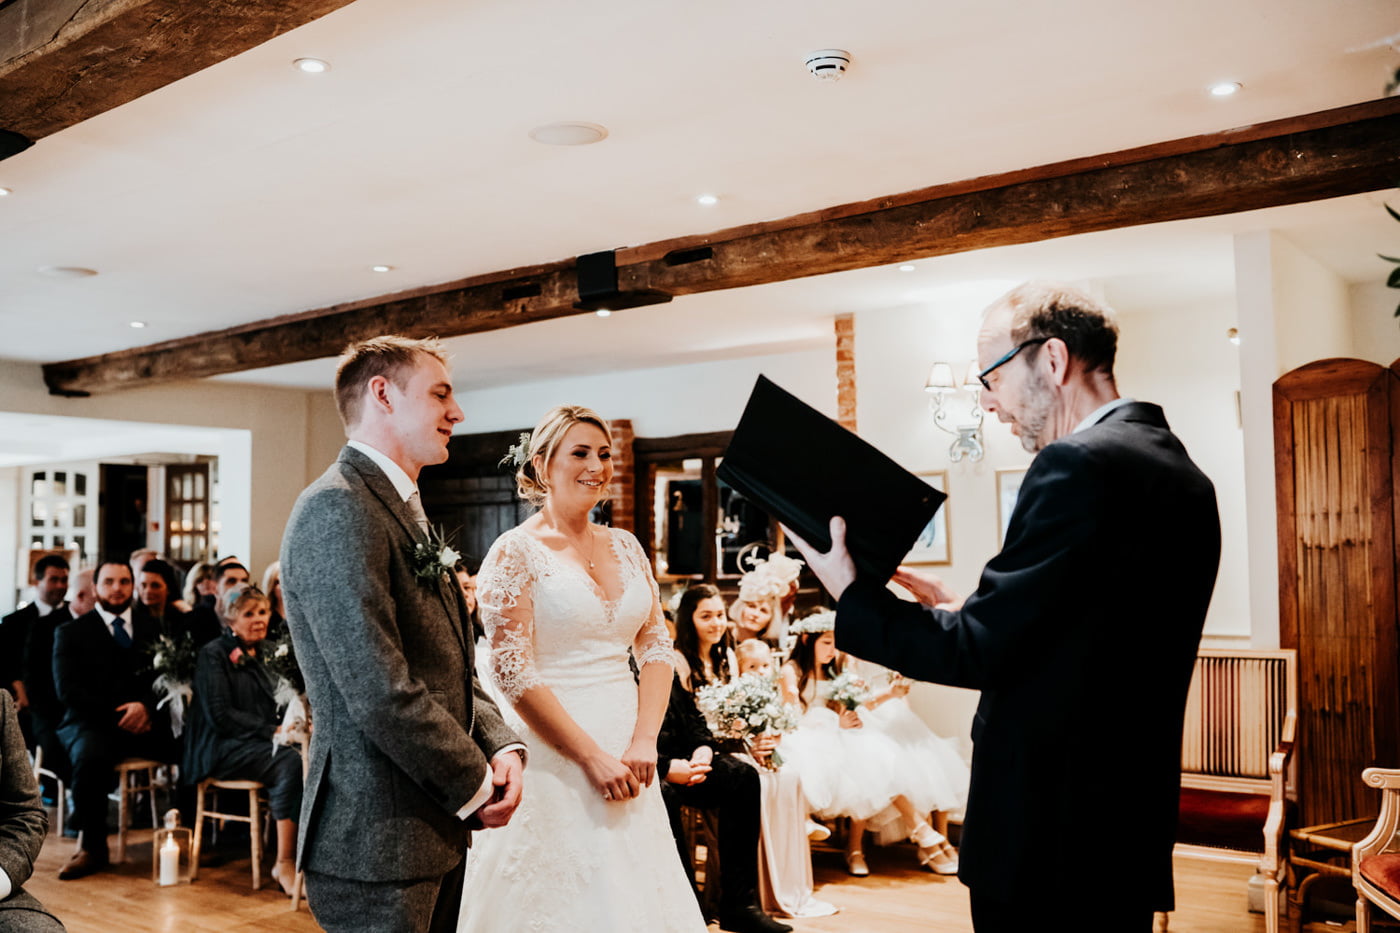 Emily and Rich, Moonraker Hotel, Wiltshire 3